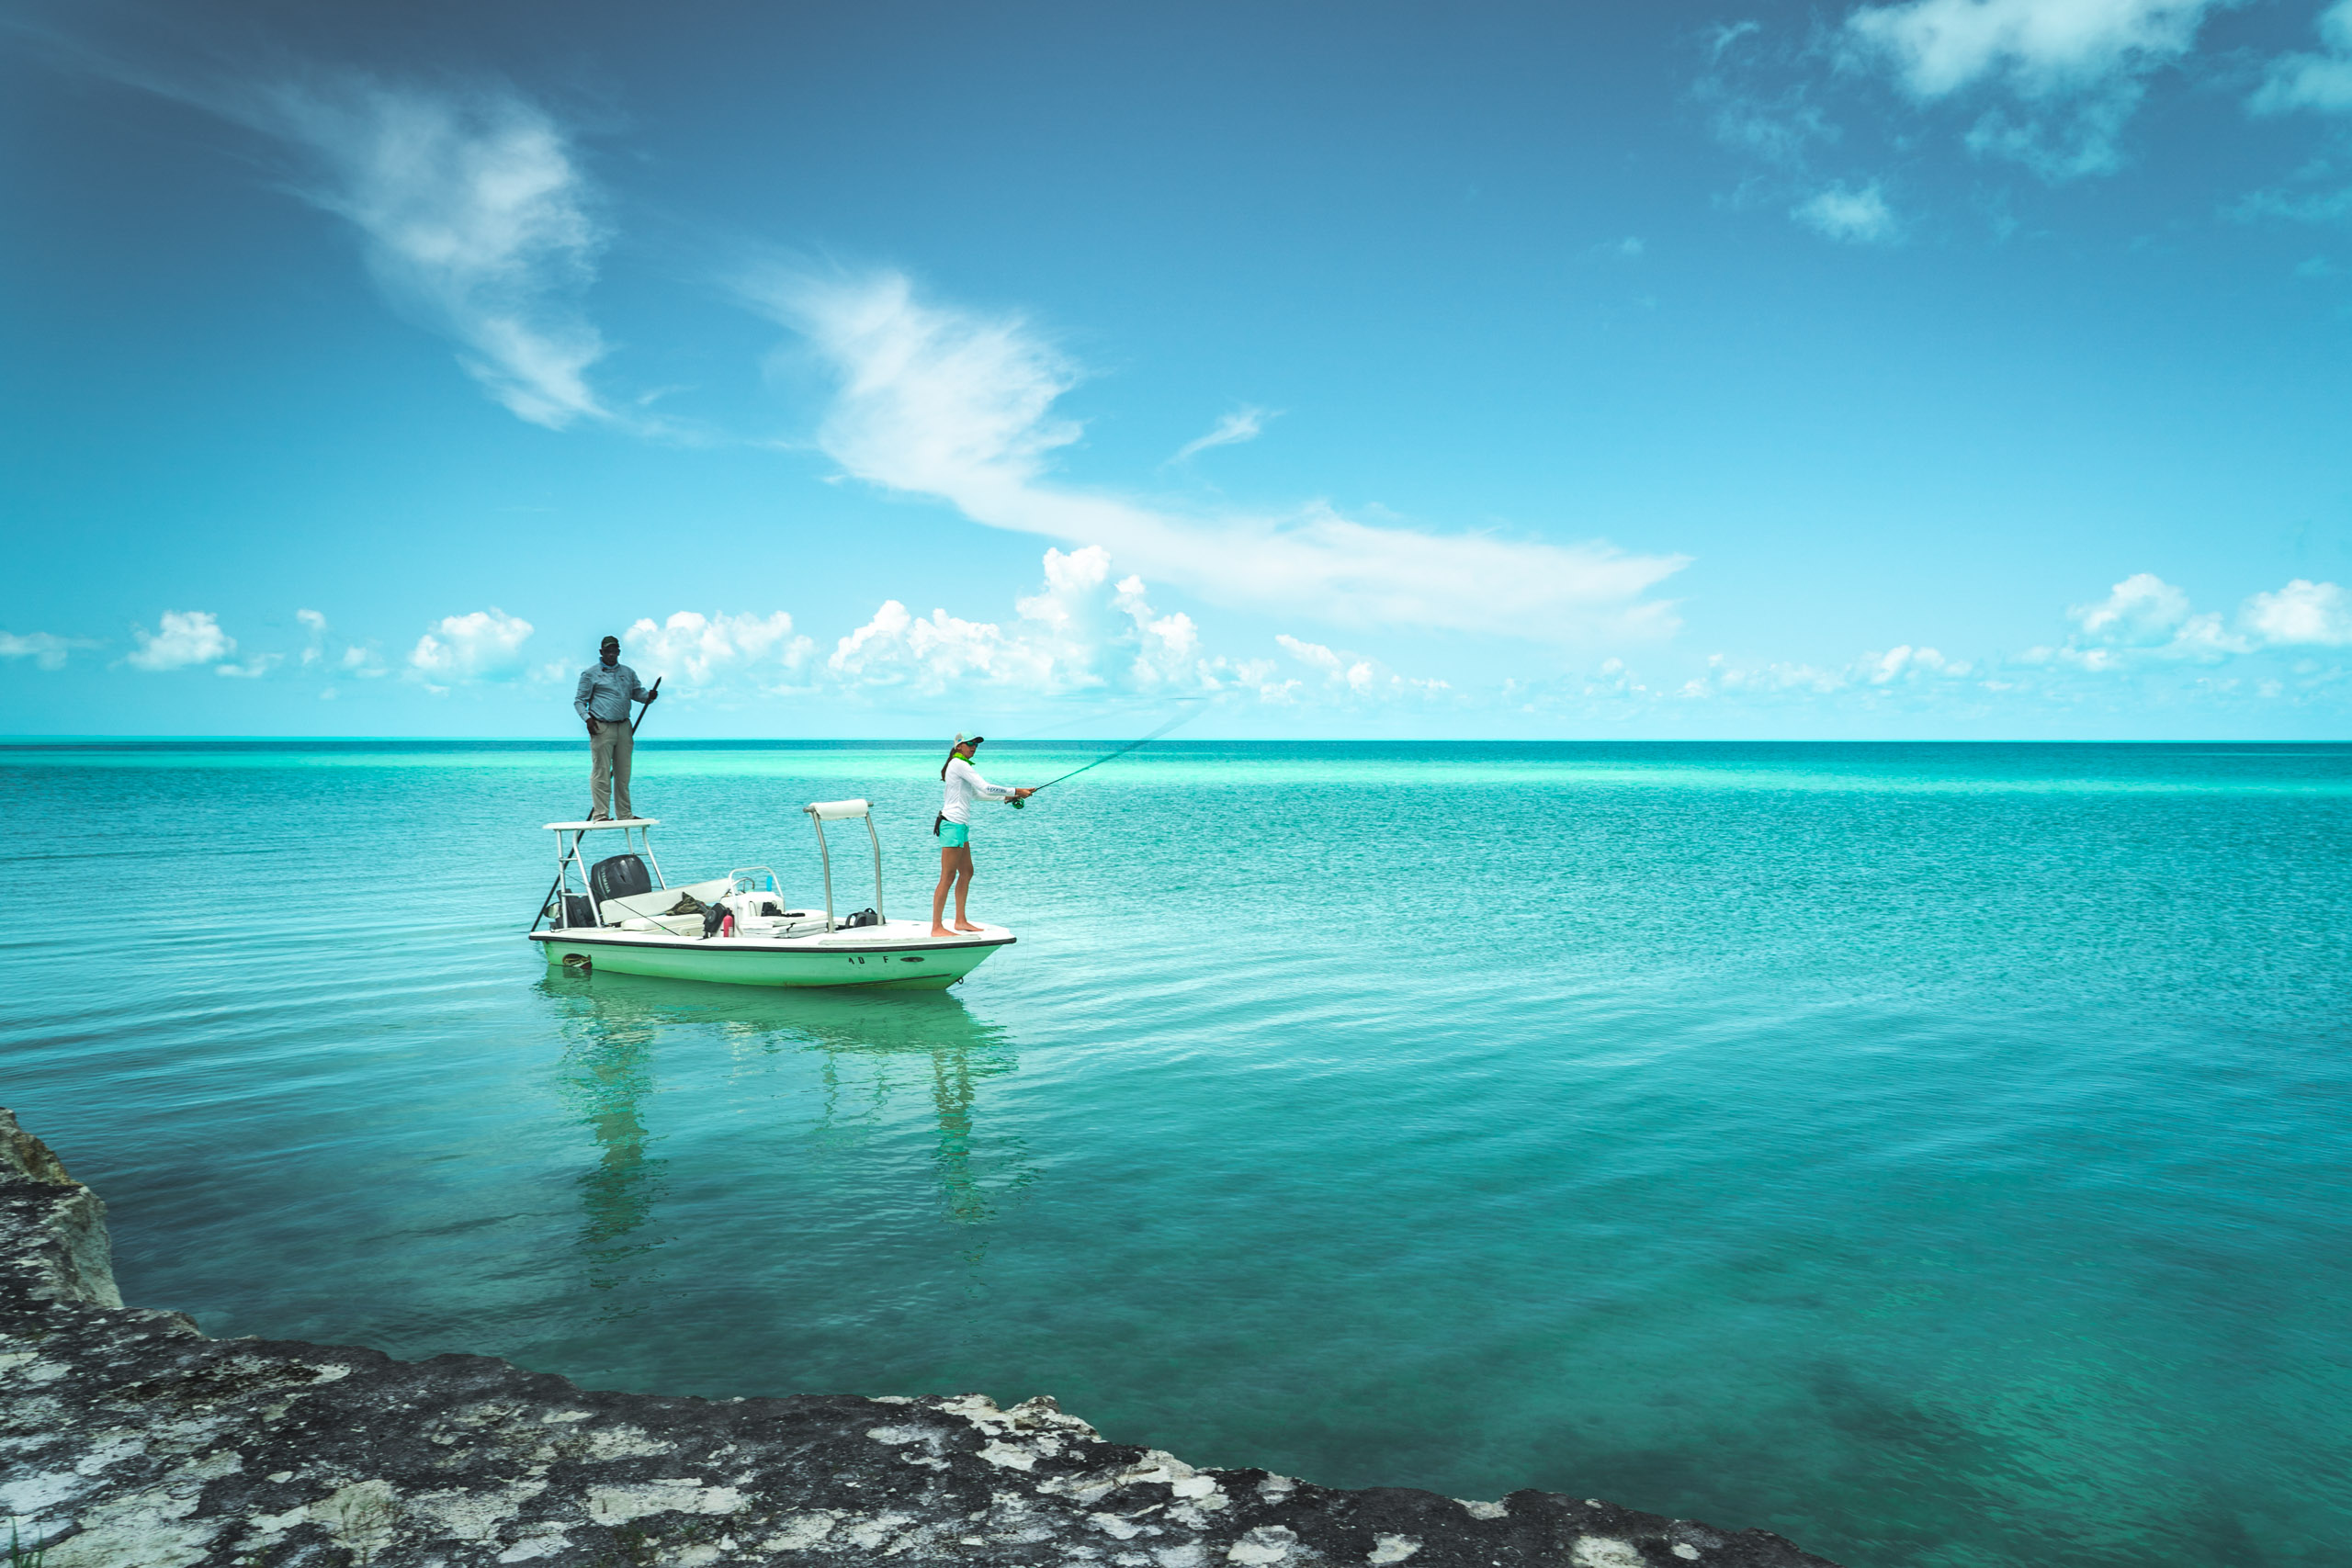 A woman casts for Bone Fish in the Bahamas off Andros Island